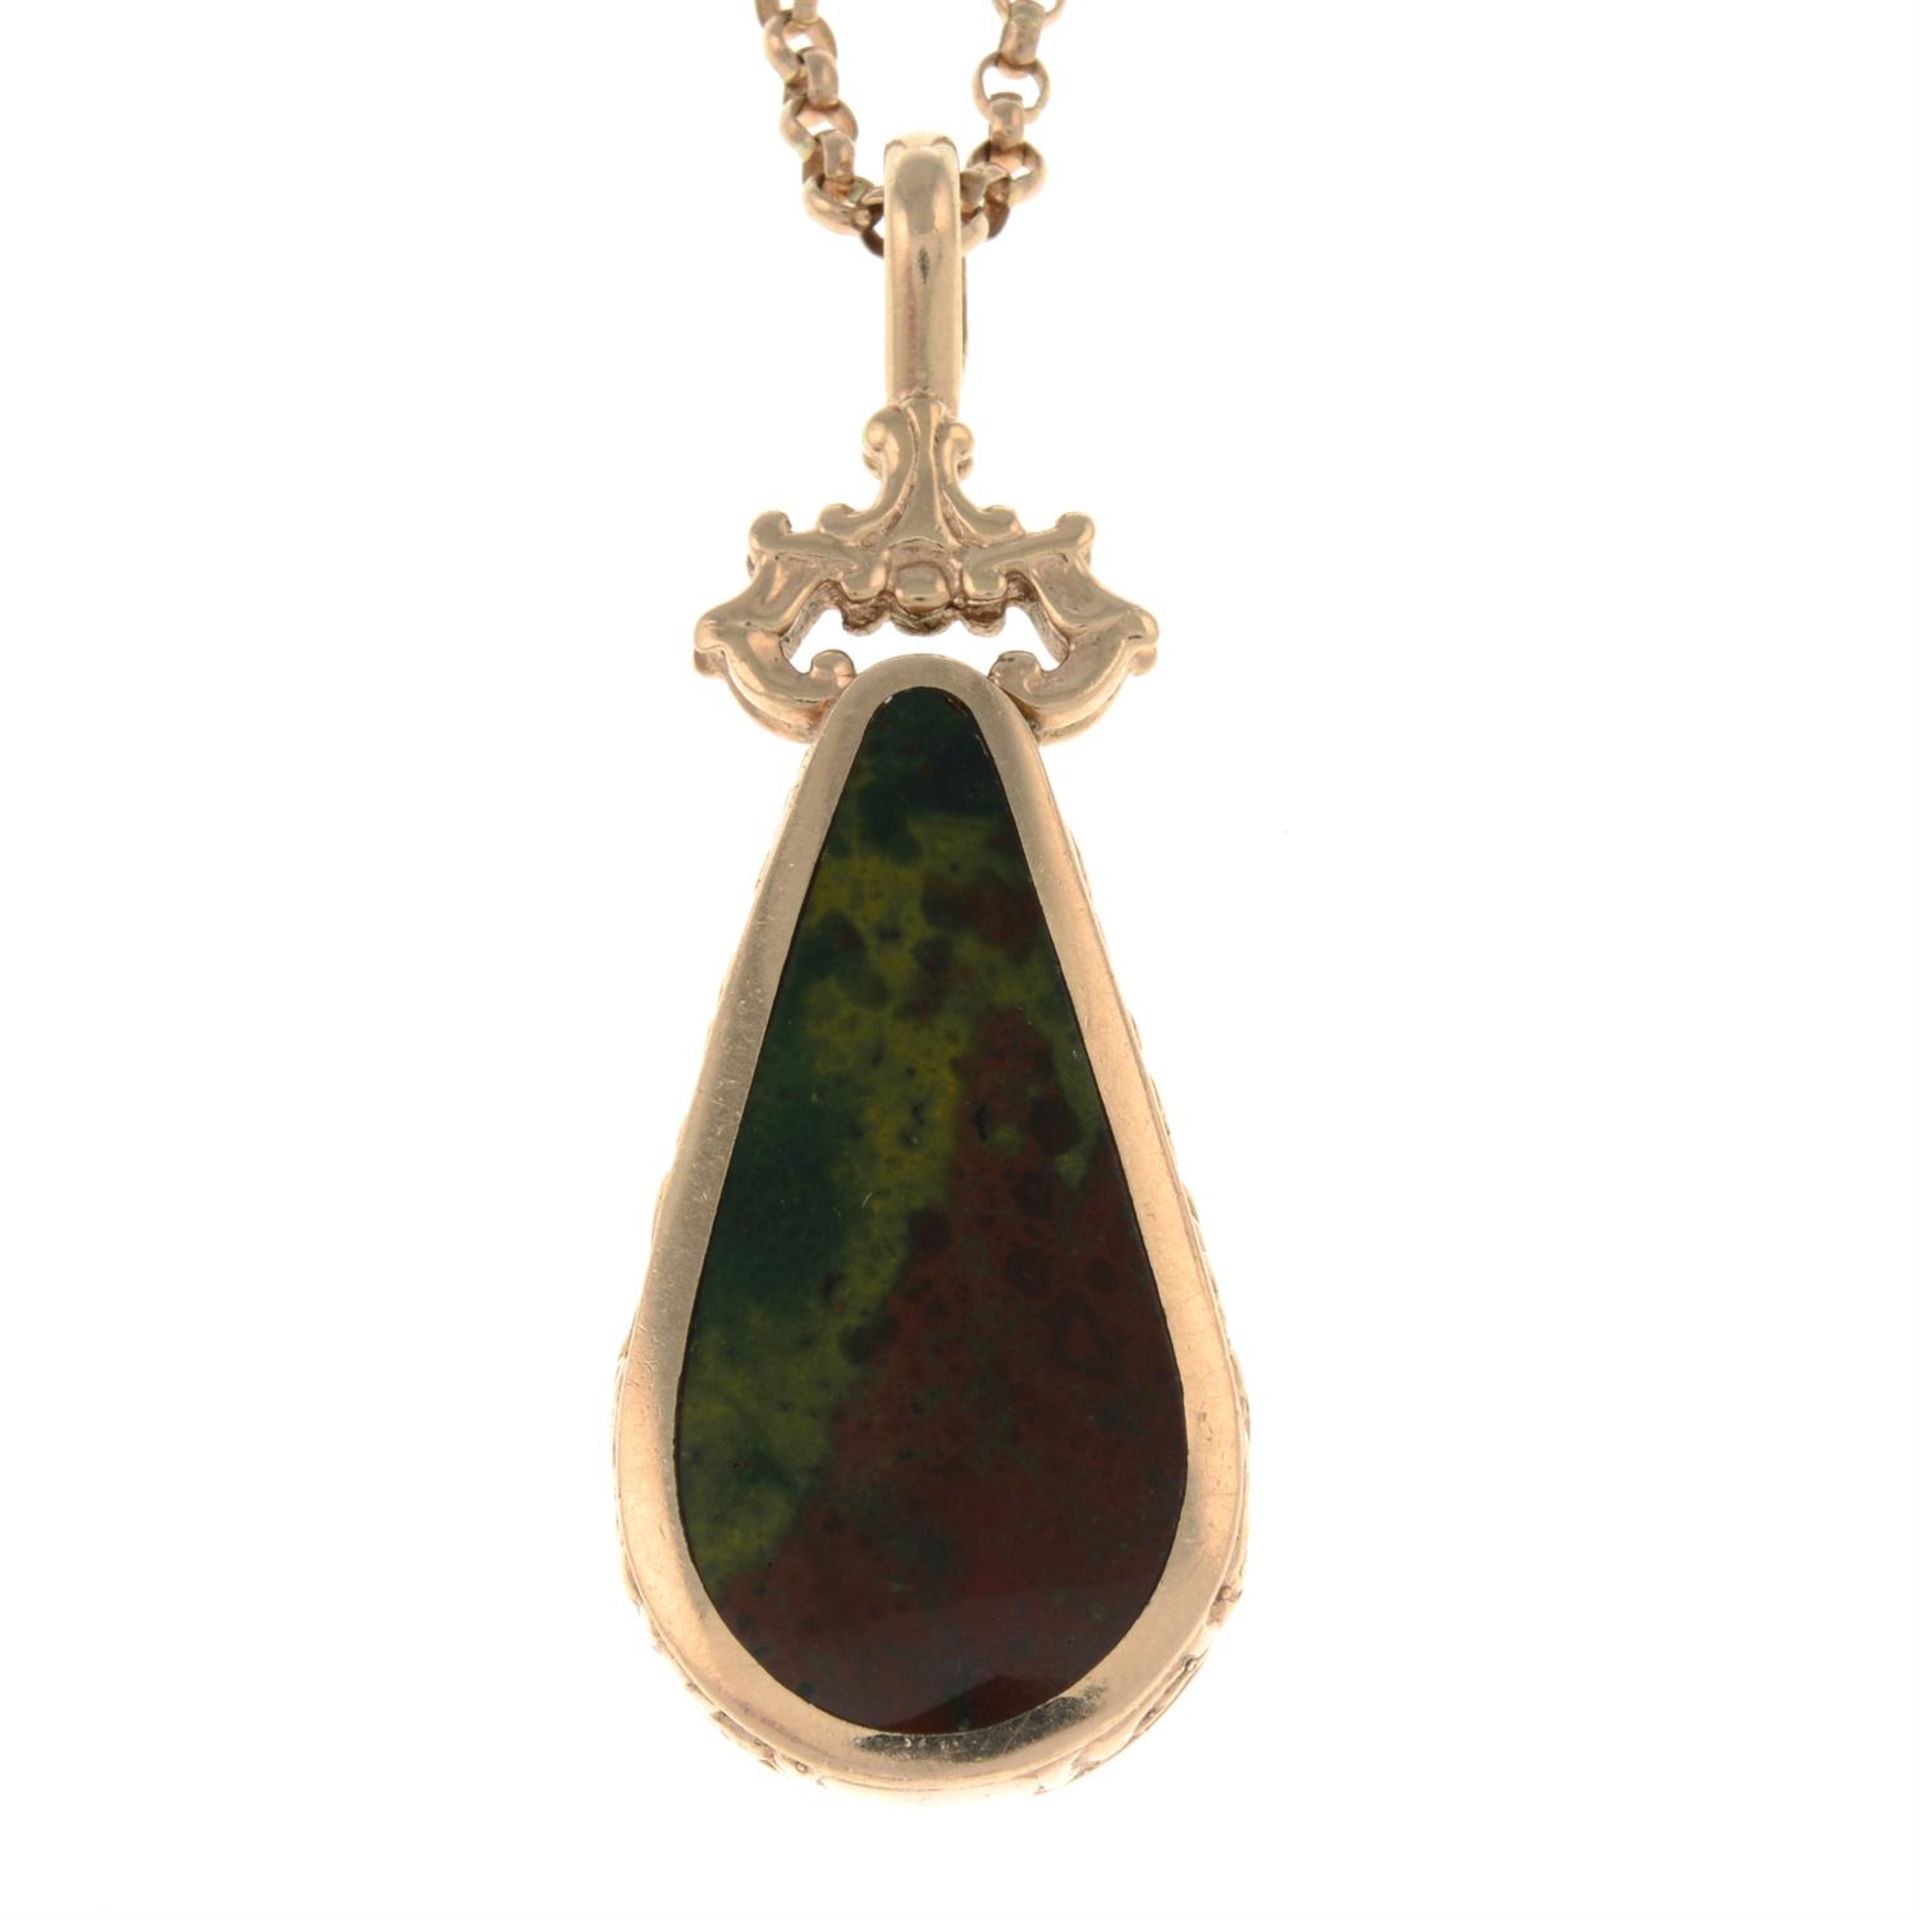 A 9ct gold agate pendant, with 9ct gold belcher-link chain.